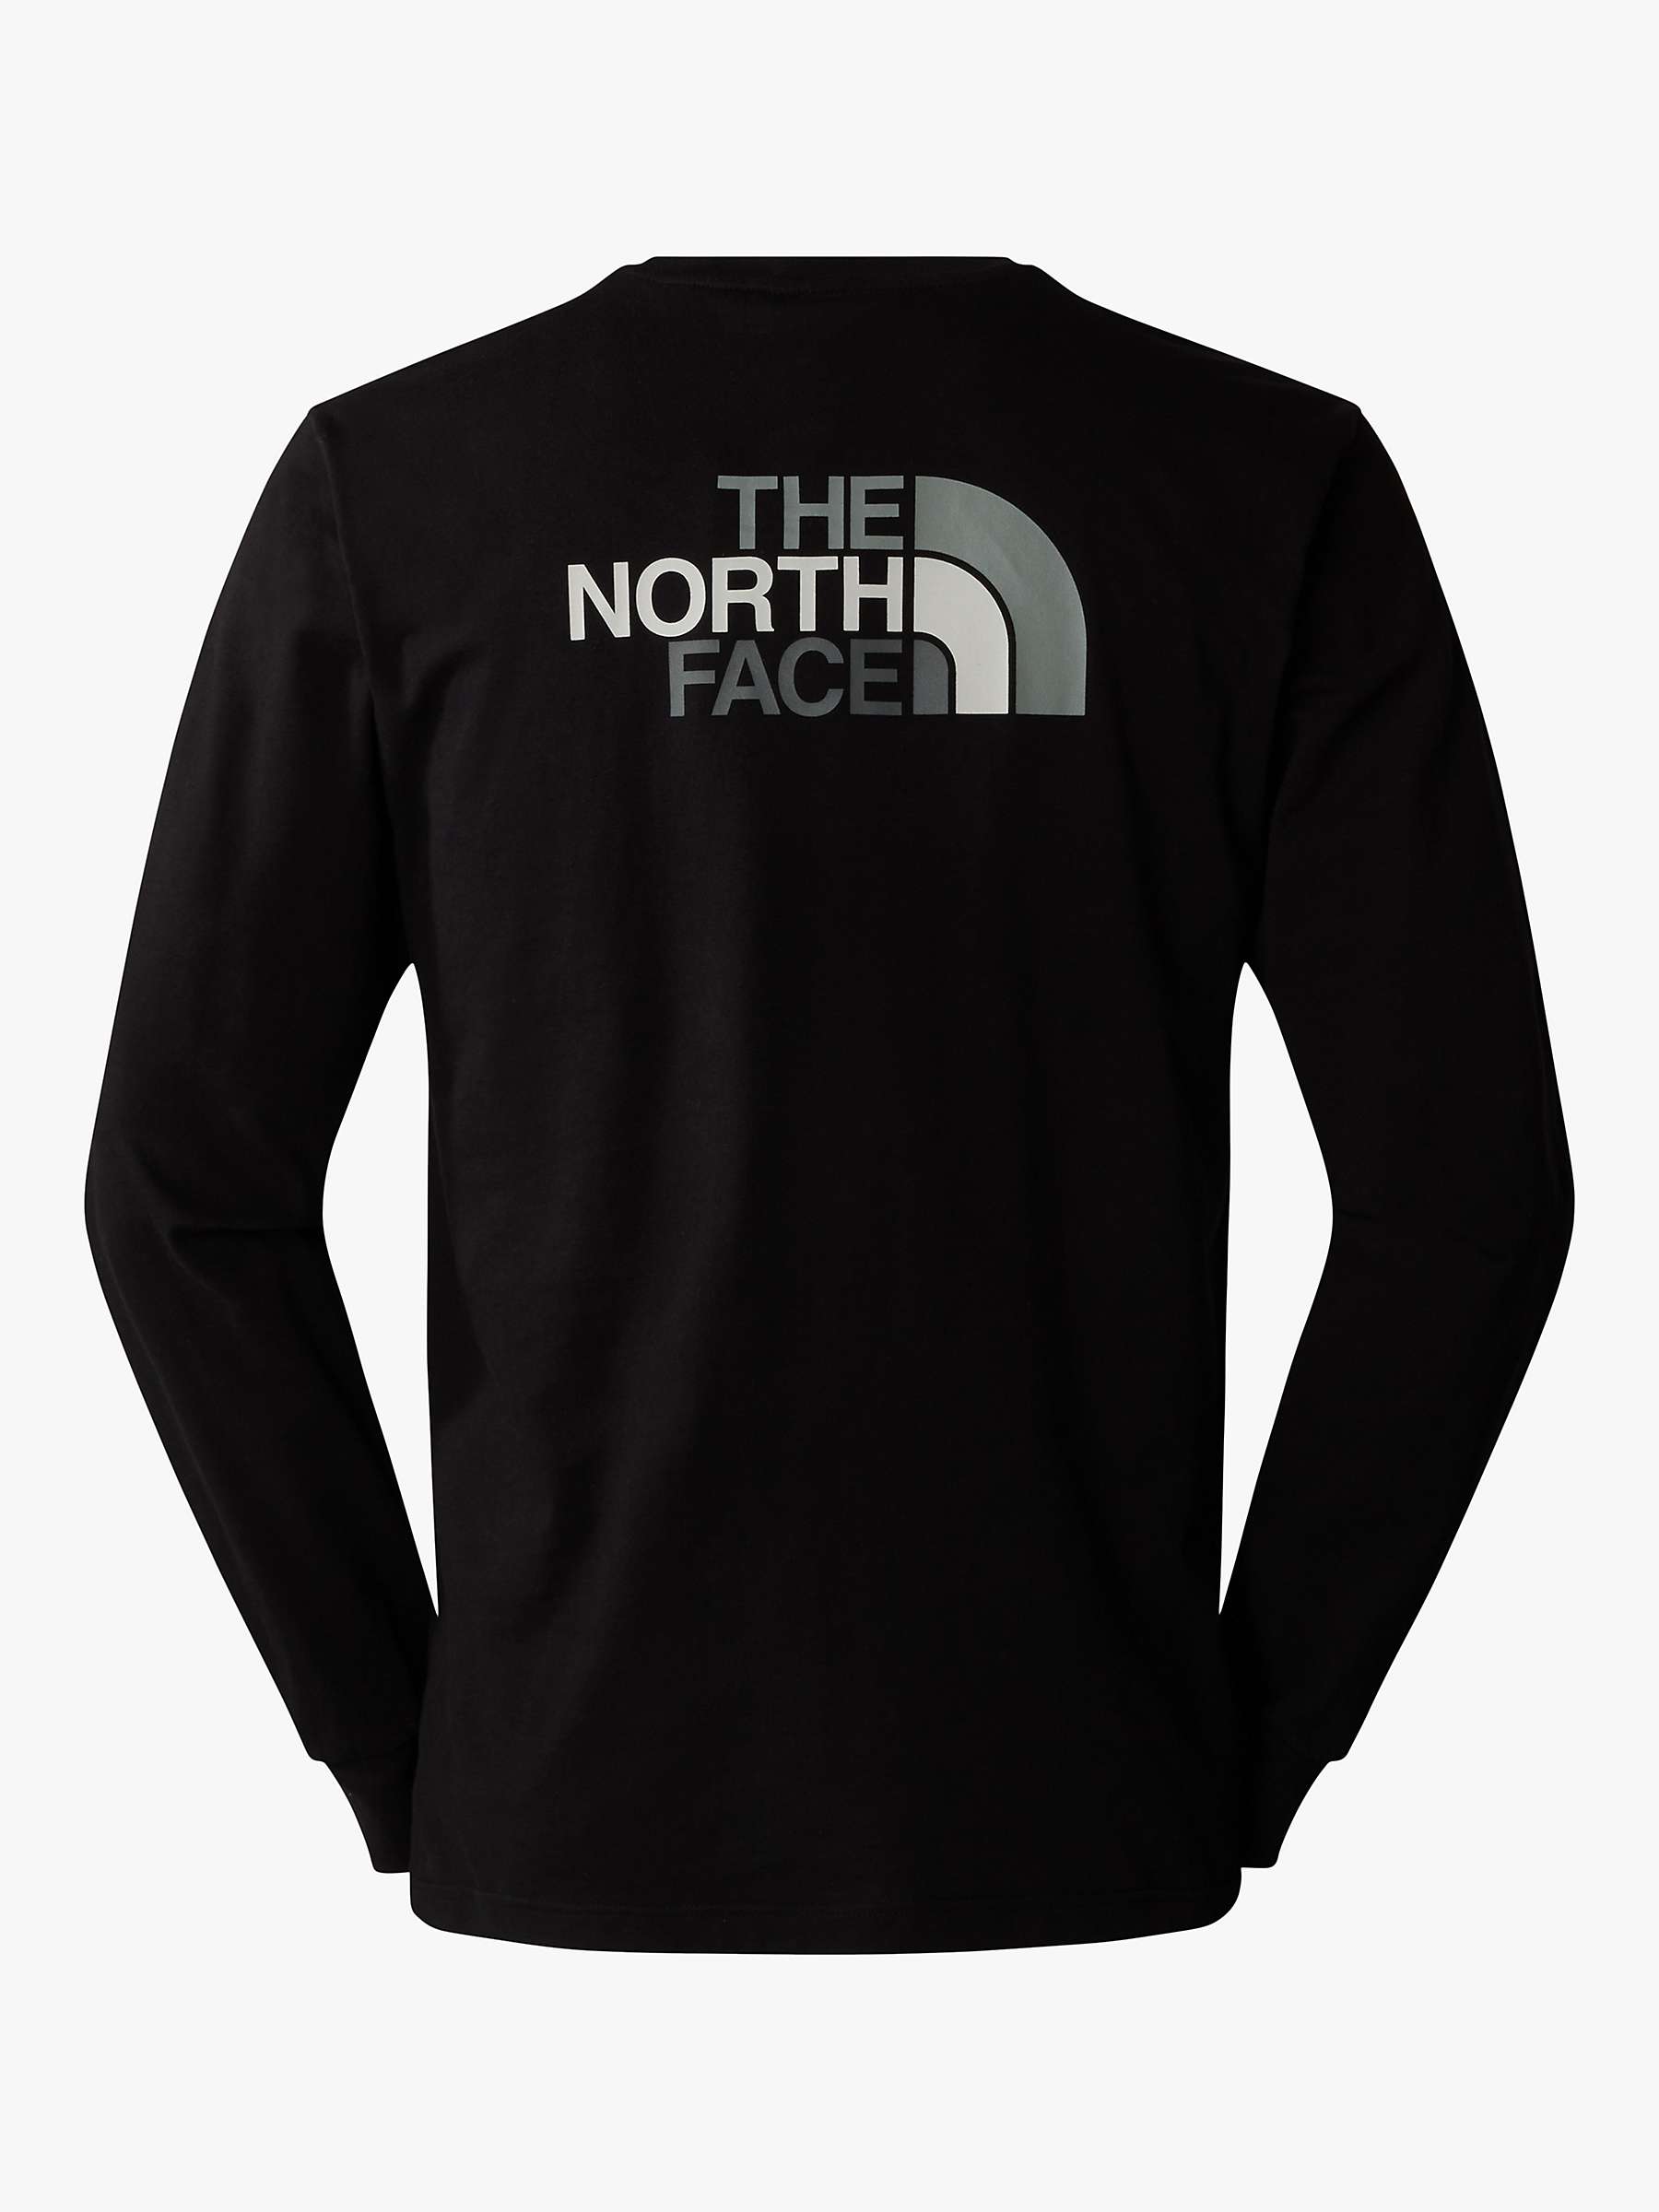 Buy The North Face Easy Long Sleeve T-Shirt, Black Online at johnlewis.com